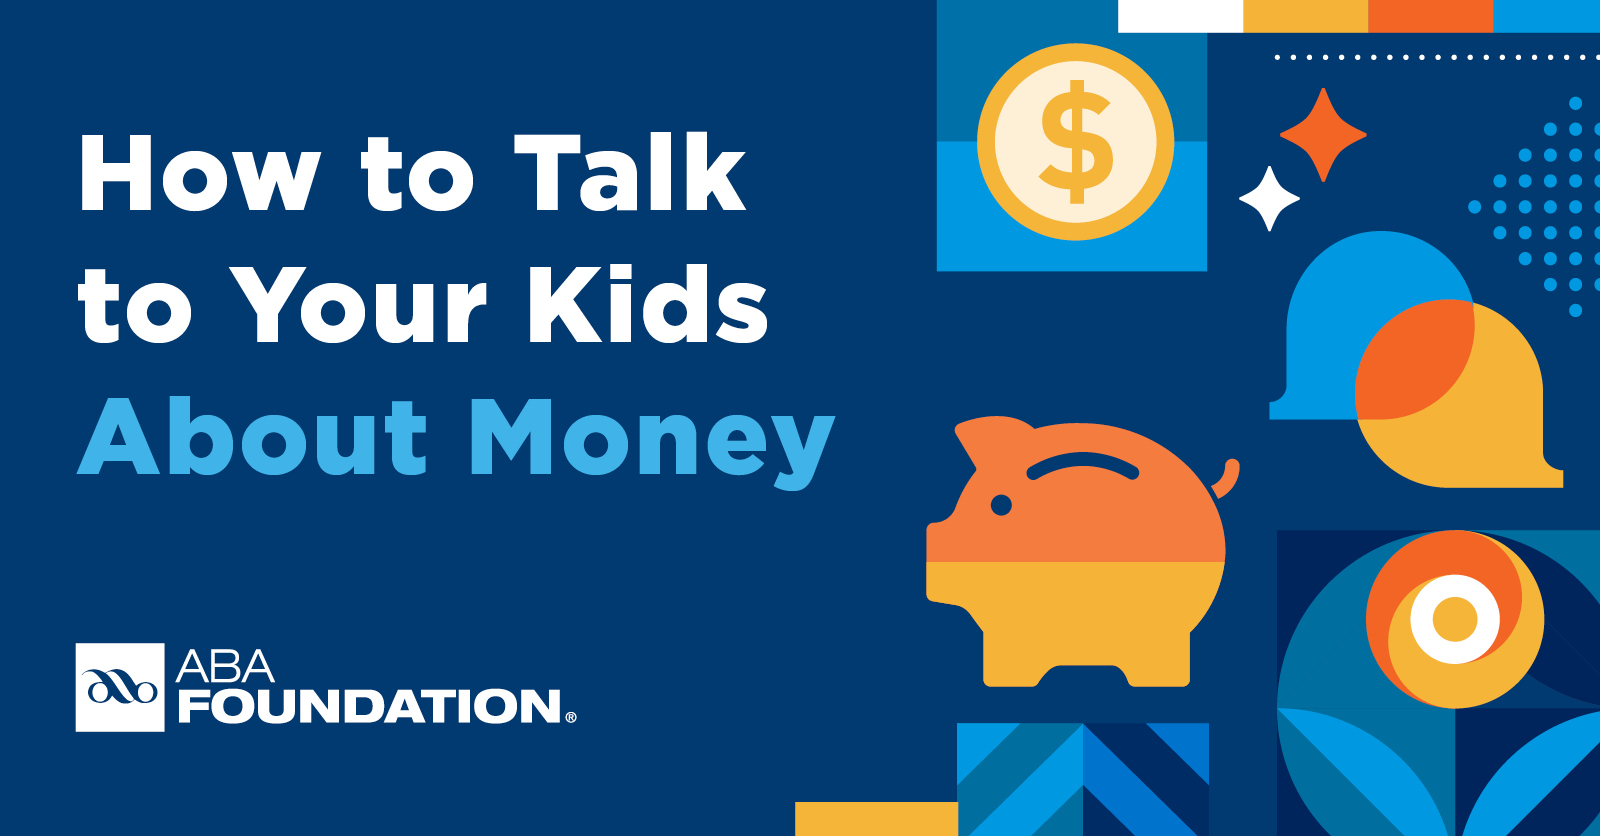 How to Talk to Your Kids About Money